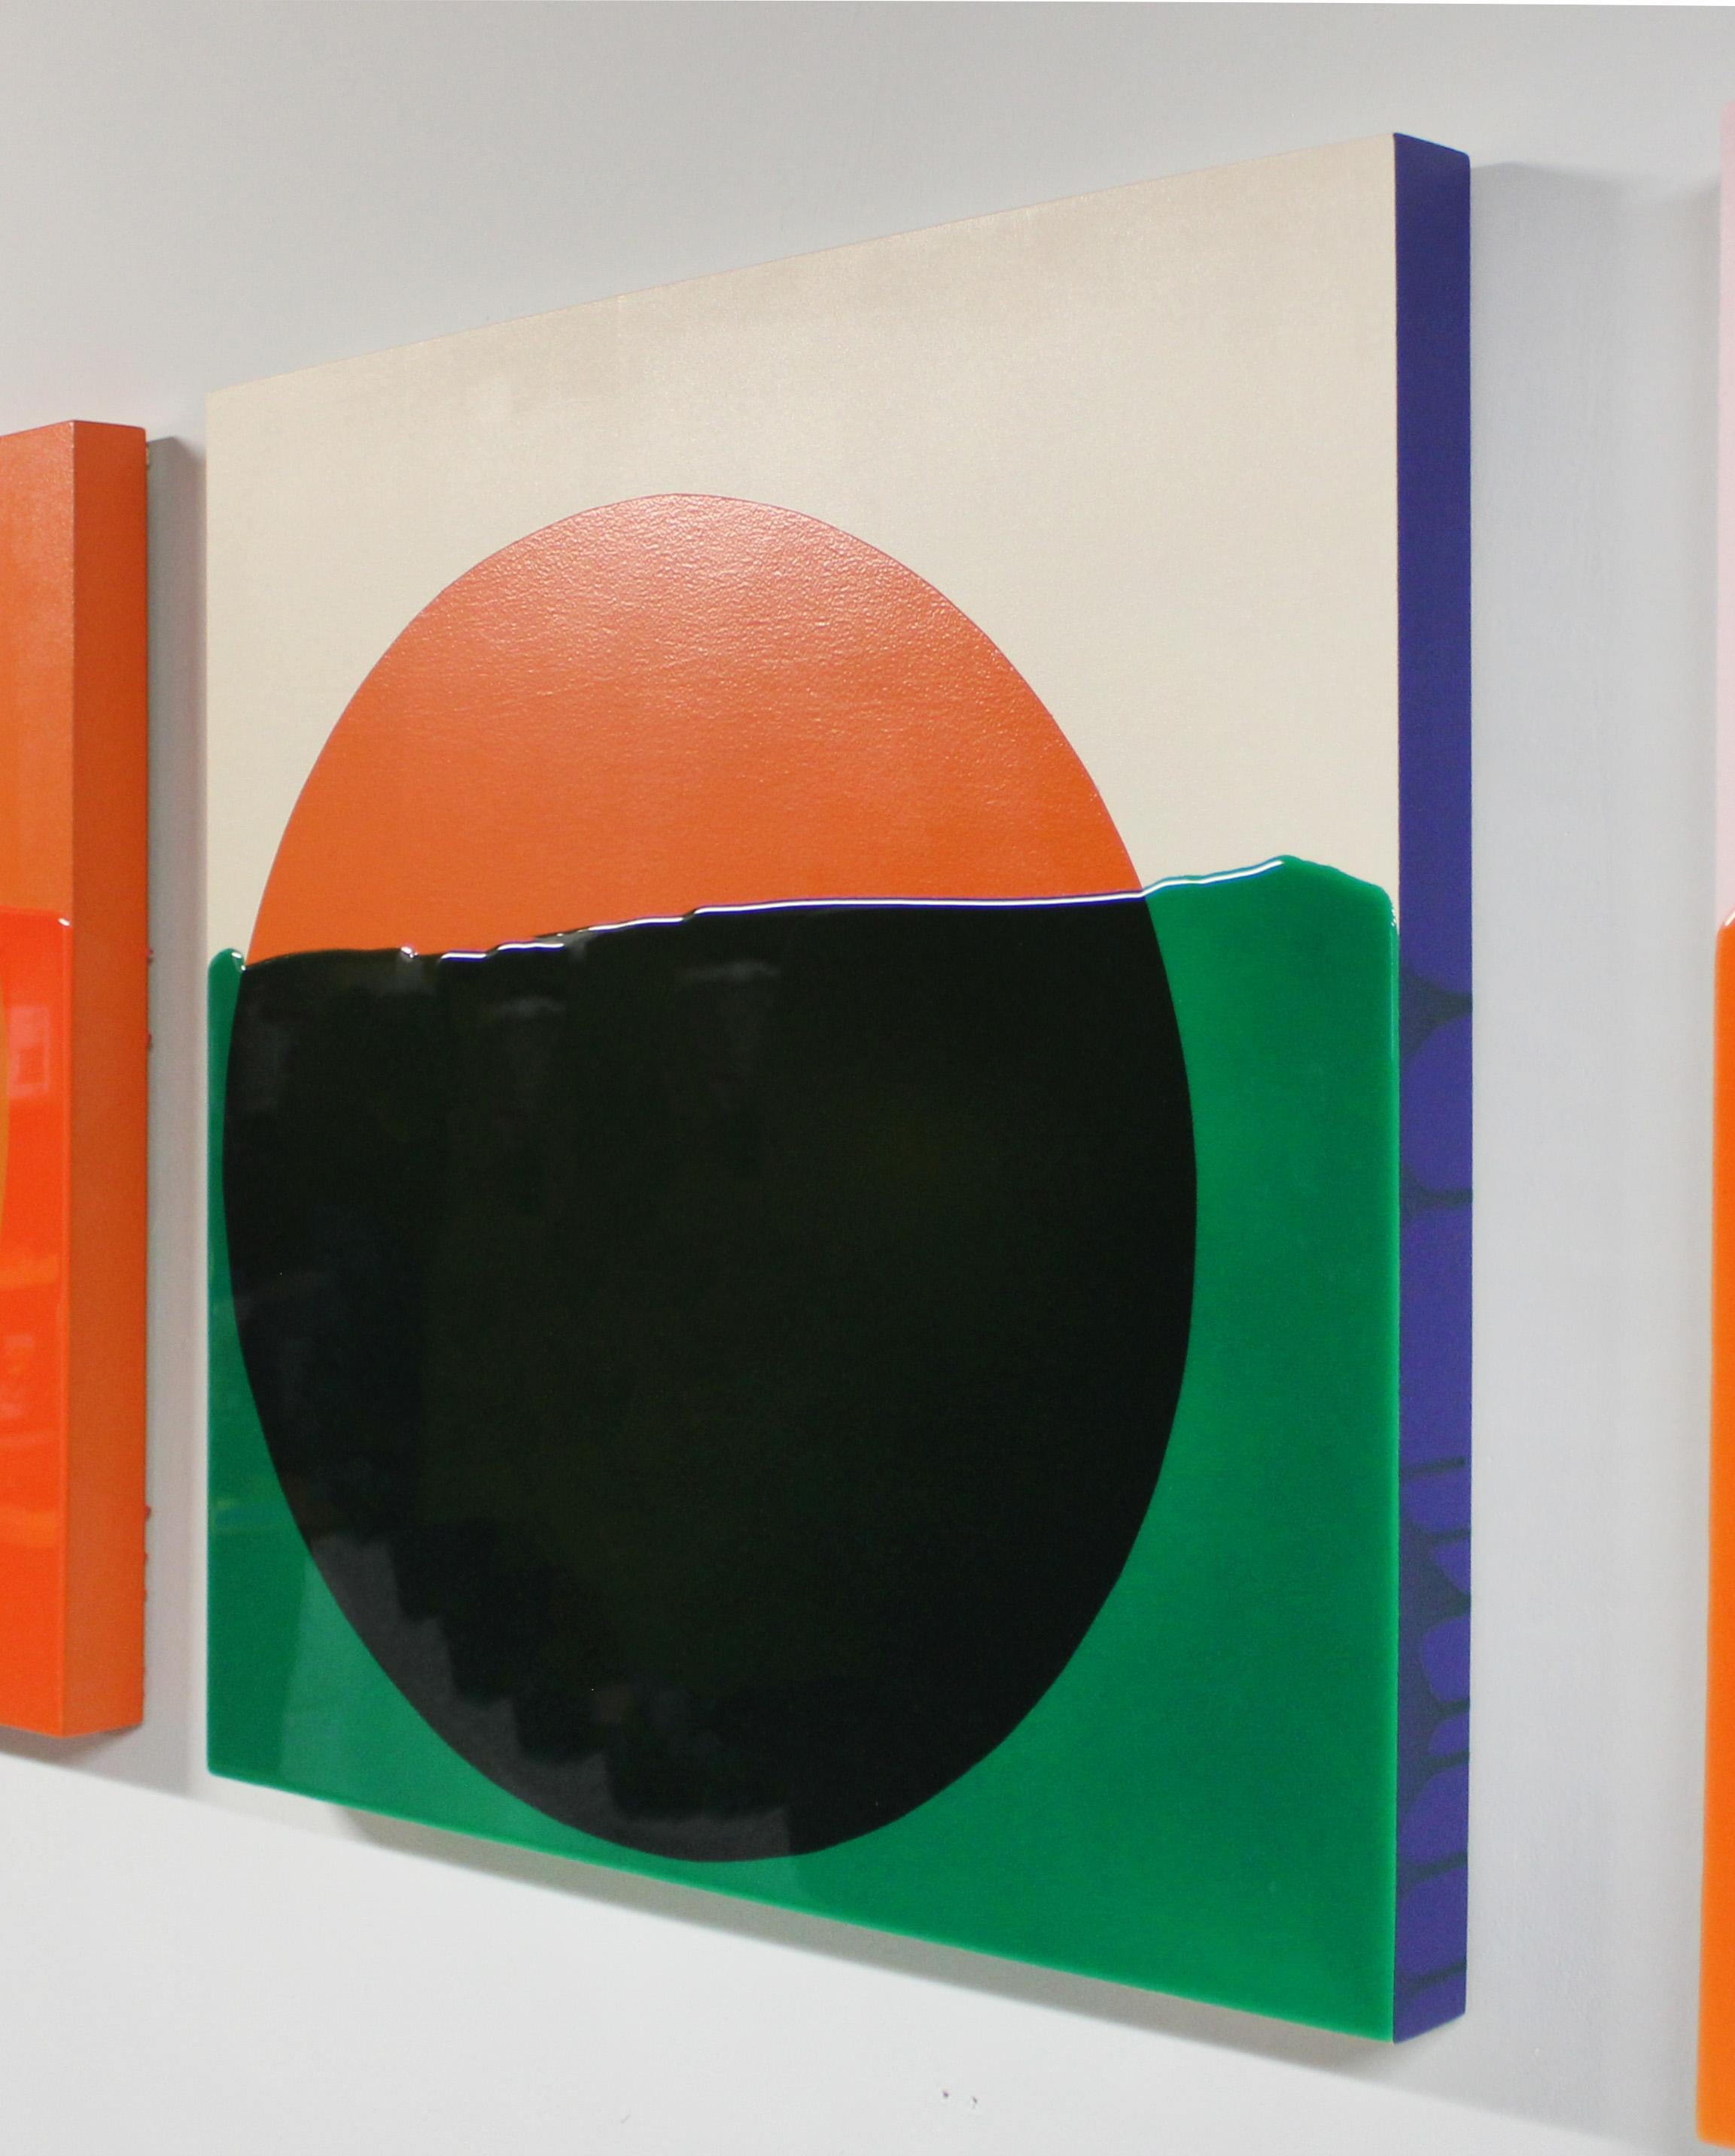 This abstract contemporary resin painting by Cameron Wilson Ritcher features a geometric style and a bright orange, green, black, and beige palette. An orange circle is at the center of the composition, slightly off-center to the left, with a beige